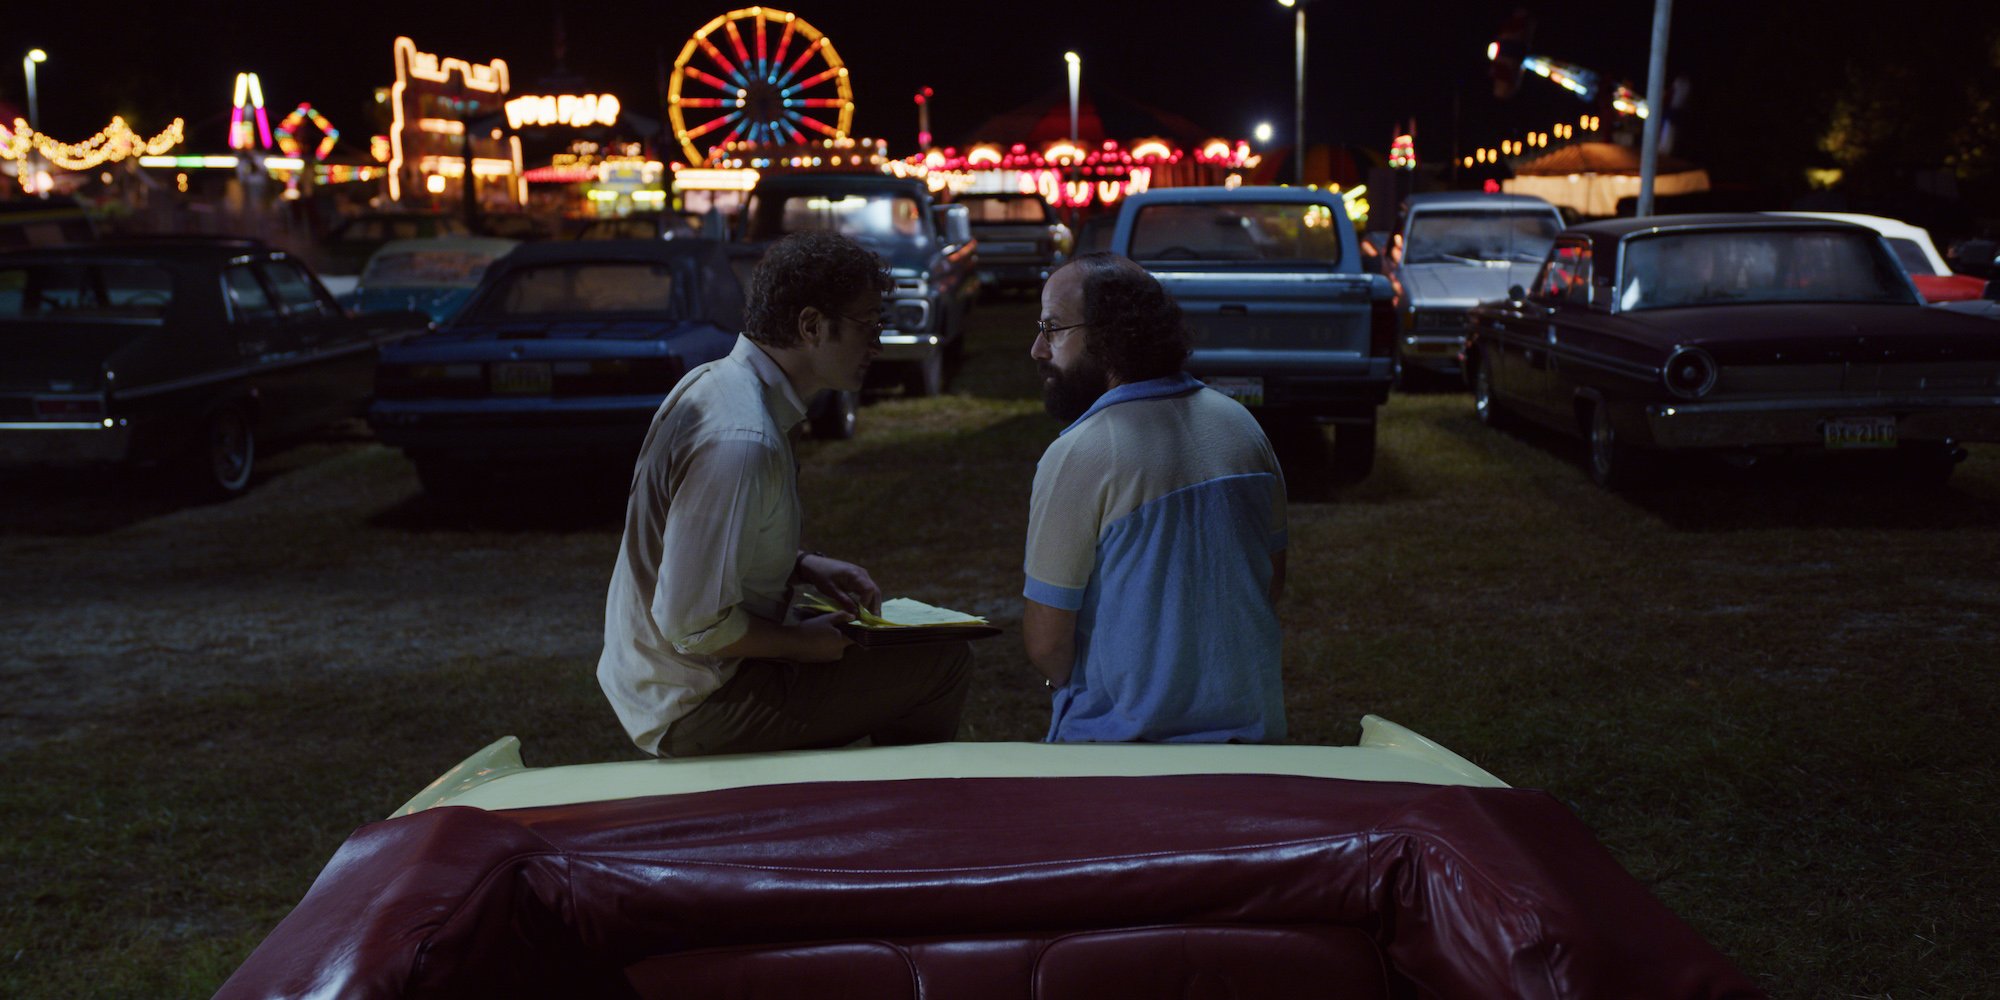 Alexei and Murray sit on a car at the Fourth of July carnival in Hawkins, Indiana in a production still from 'Stranger Things' season 3. How will the show address what happened in Hawkins in 'Stranger Things' Season 4?